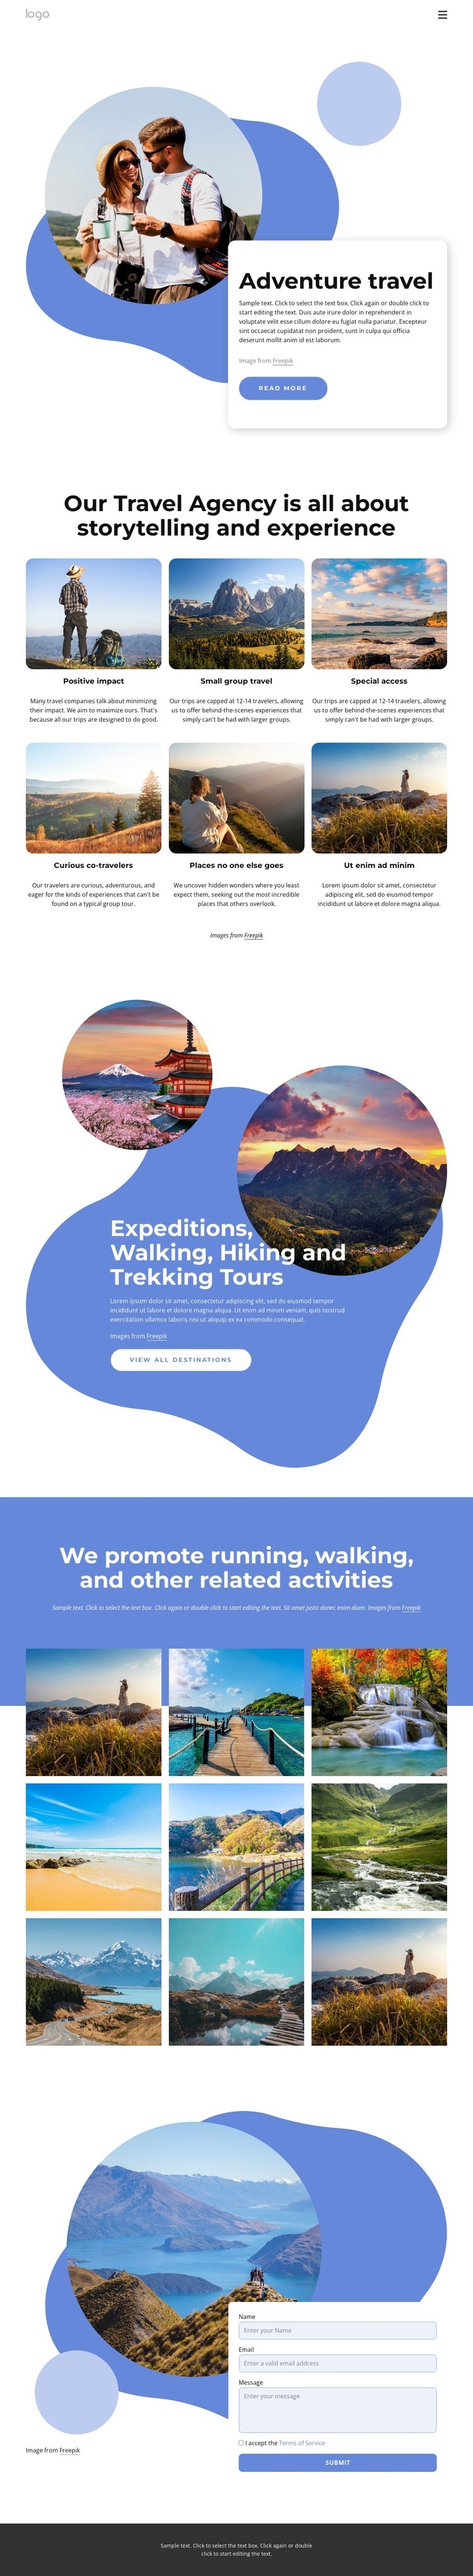 We are a full service travel agency Homepage Design